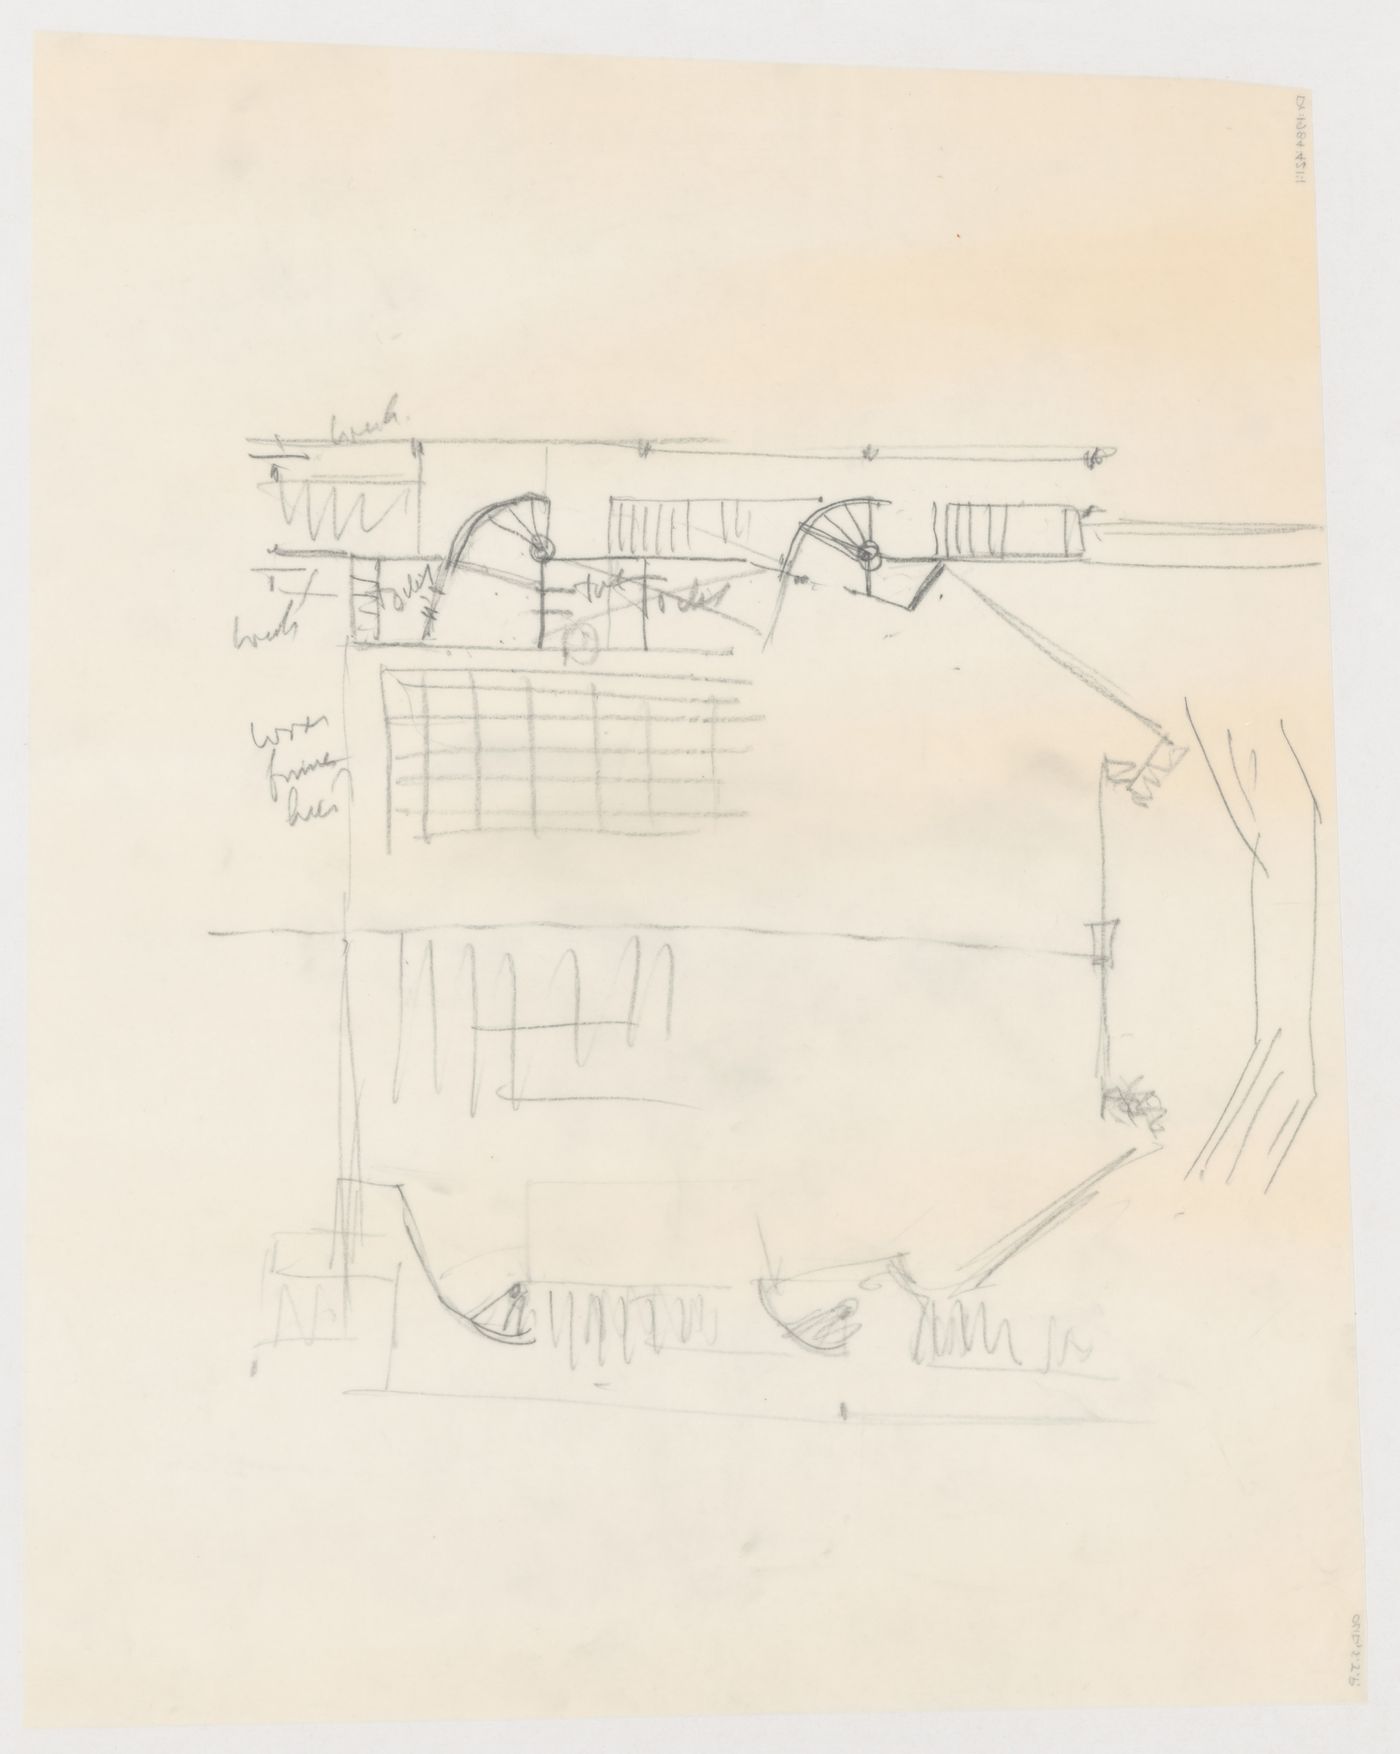 Sketch plan for the main auditorium showing staircases for the Congress Hall Complex, The Hague, Netherlands